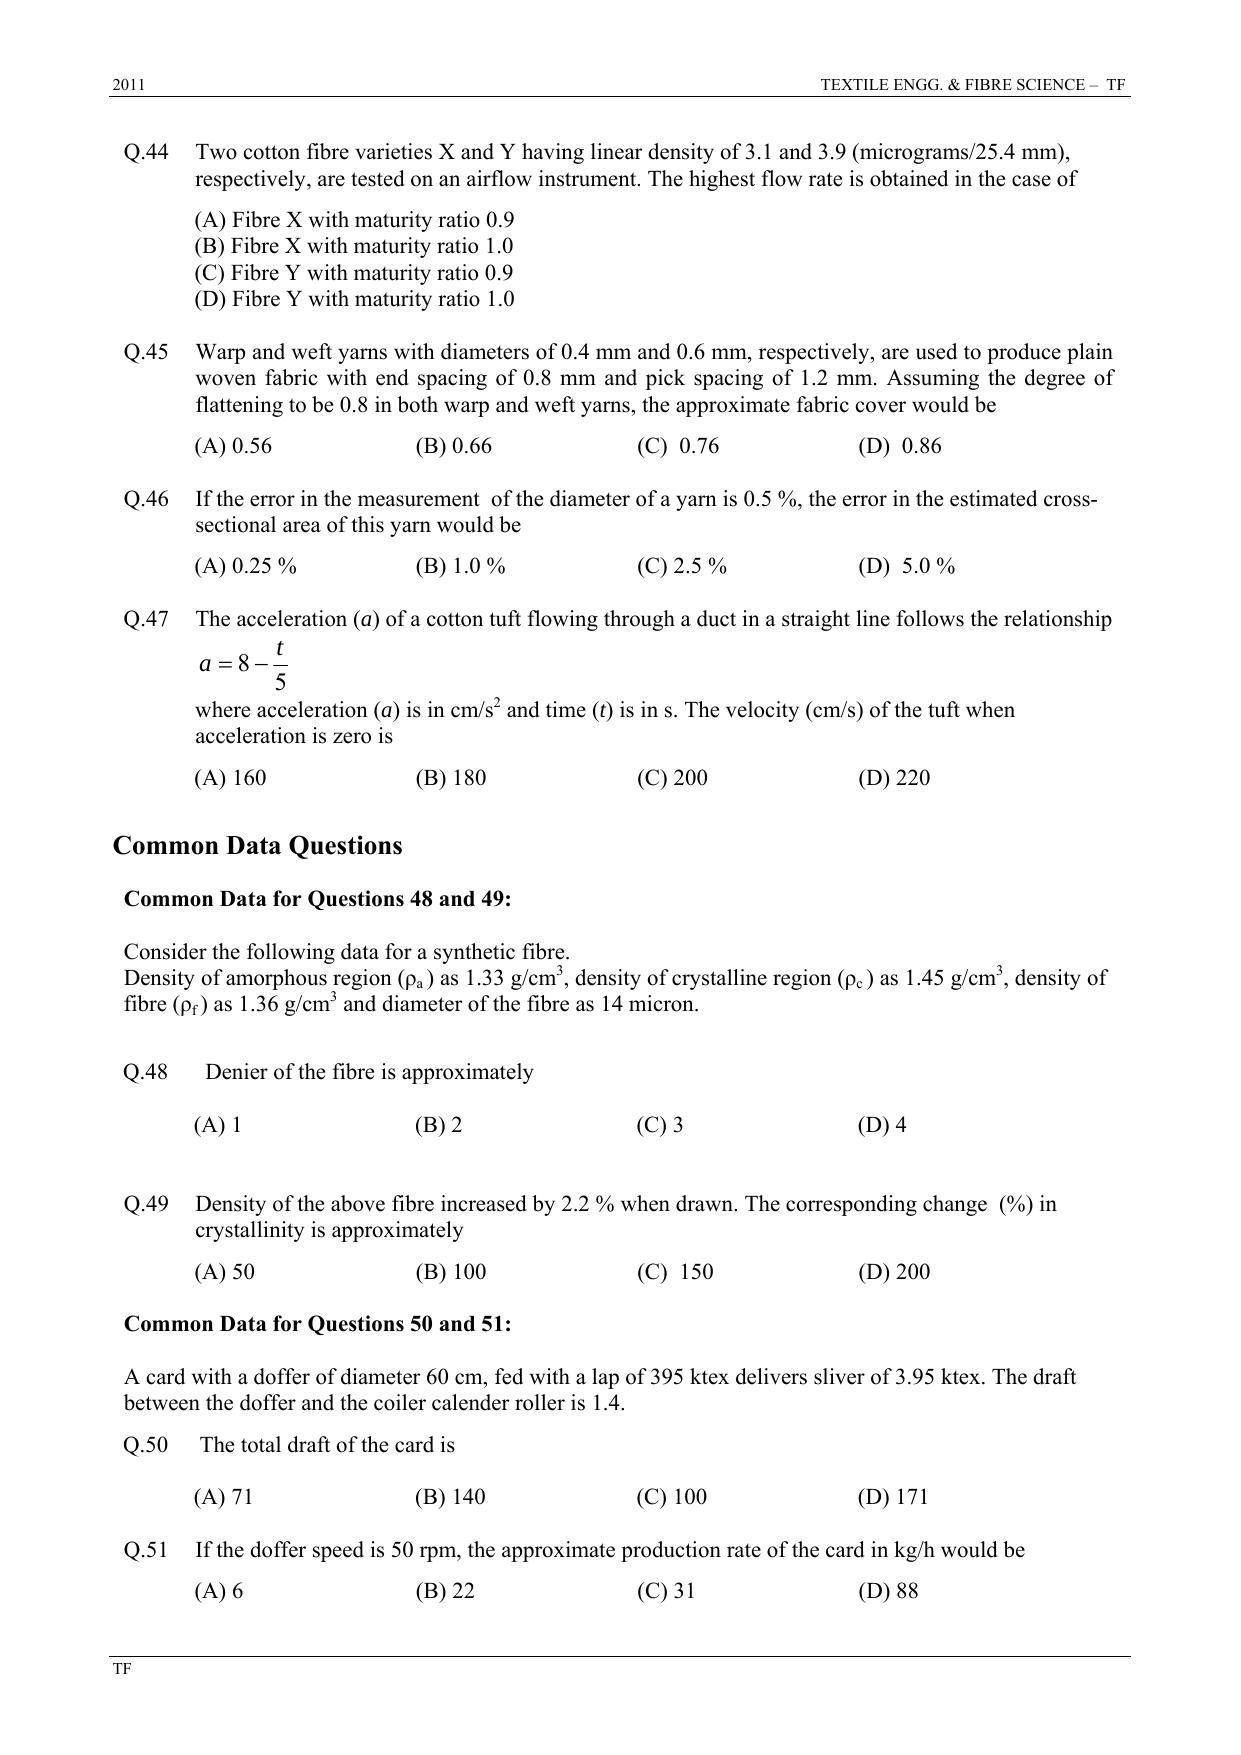 GATE 2011 Textile Engineering and Fibre Science (TF) Question Paper with Answer Key - Page 8